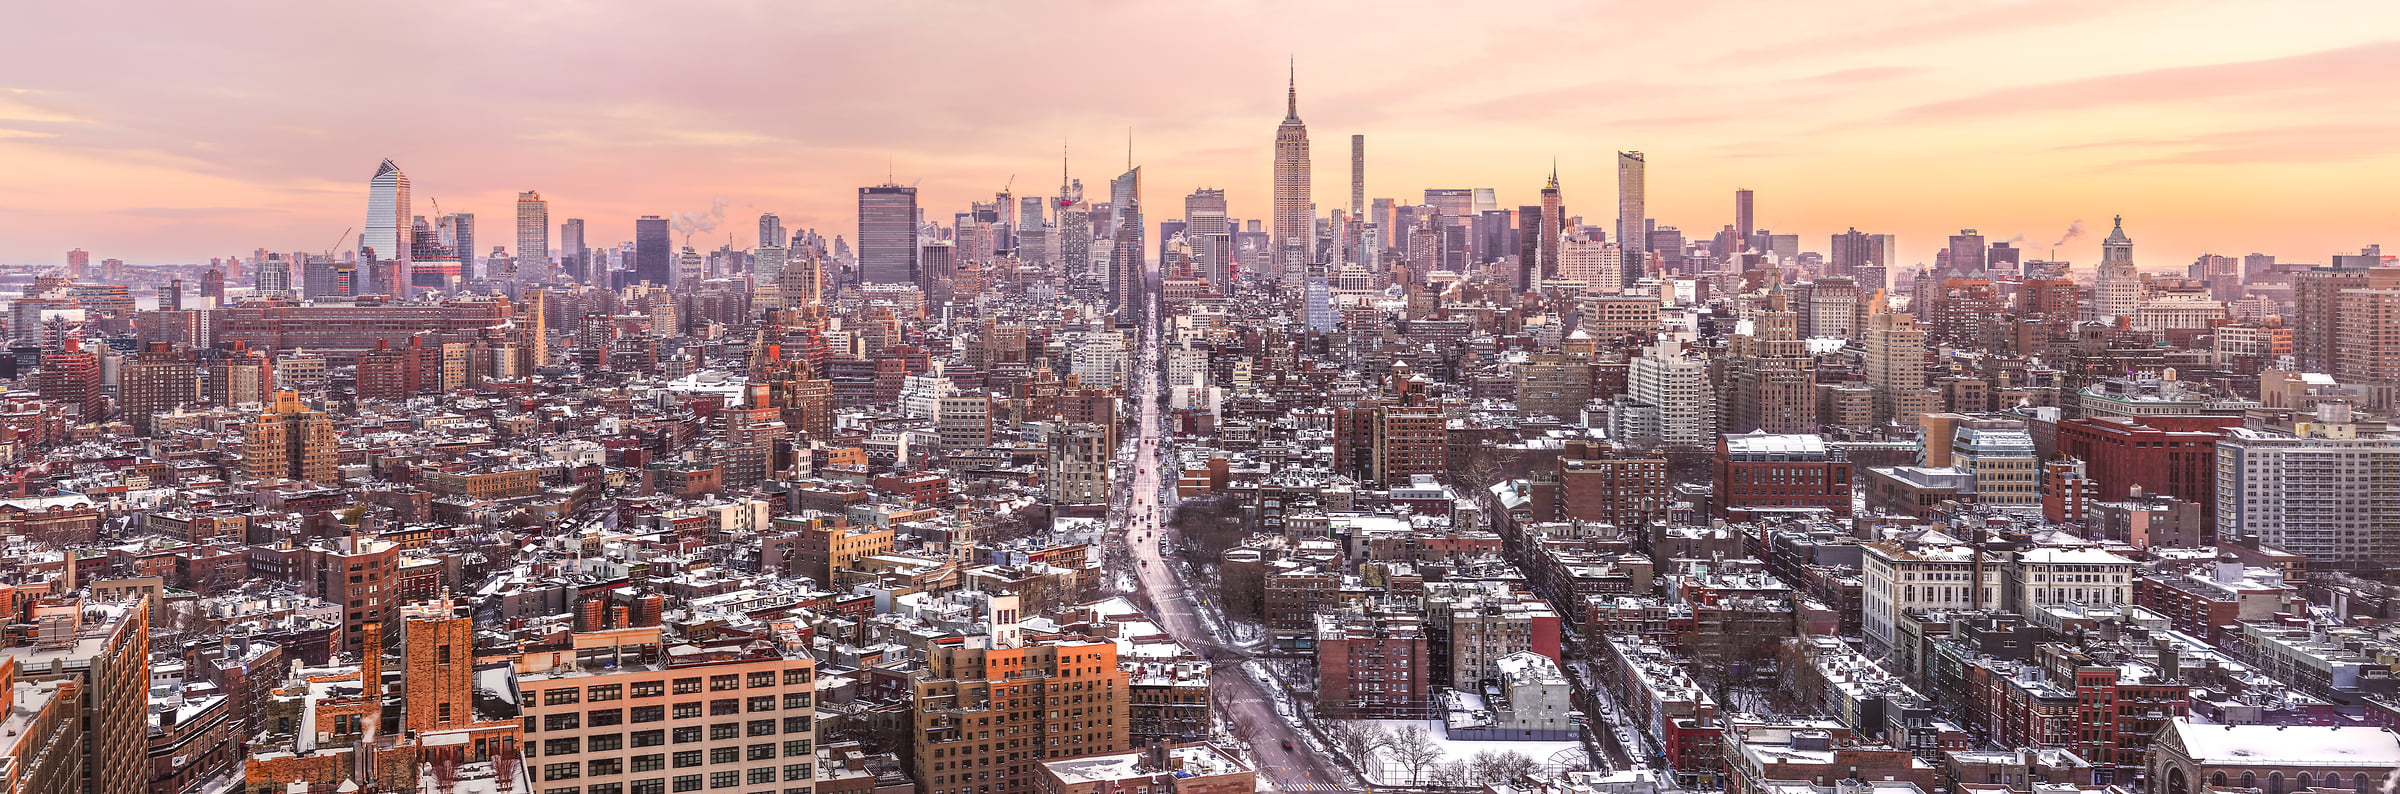 1,703 megapixels! A very high resolution, large-format VAST photo print of the NYC skyline in winter snow; cityscape sunrise fine art photo created by Dan Piech in New York City